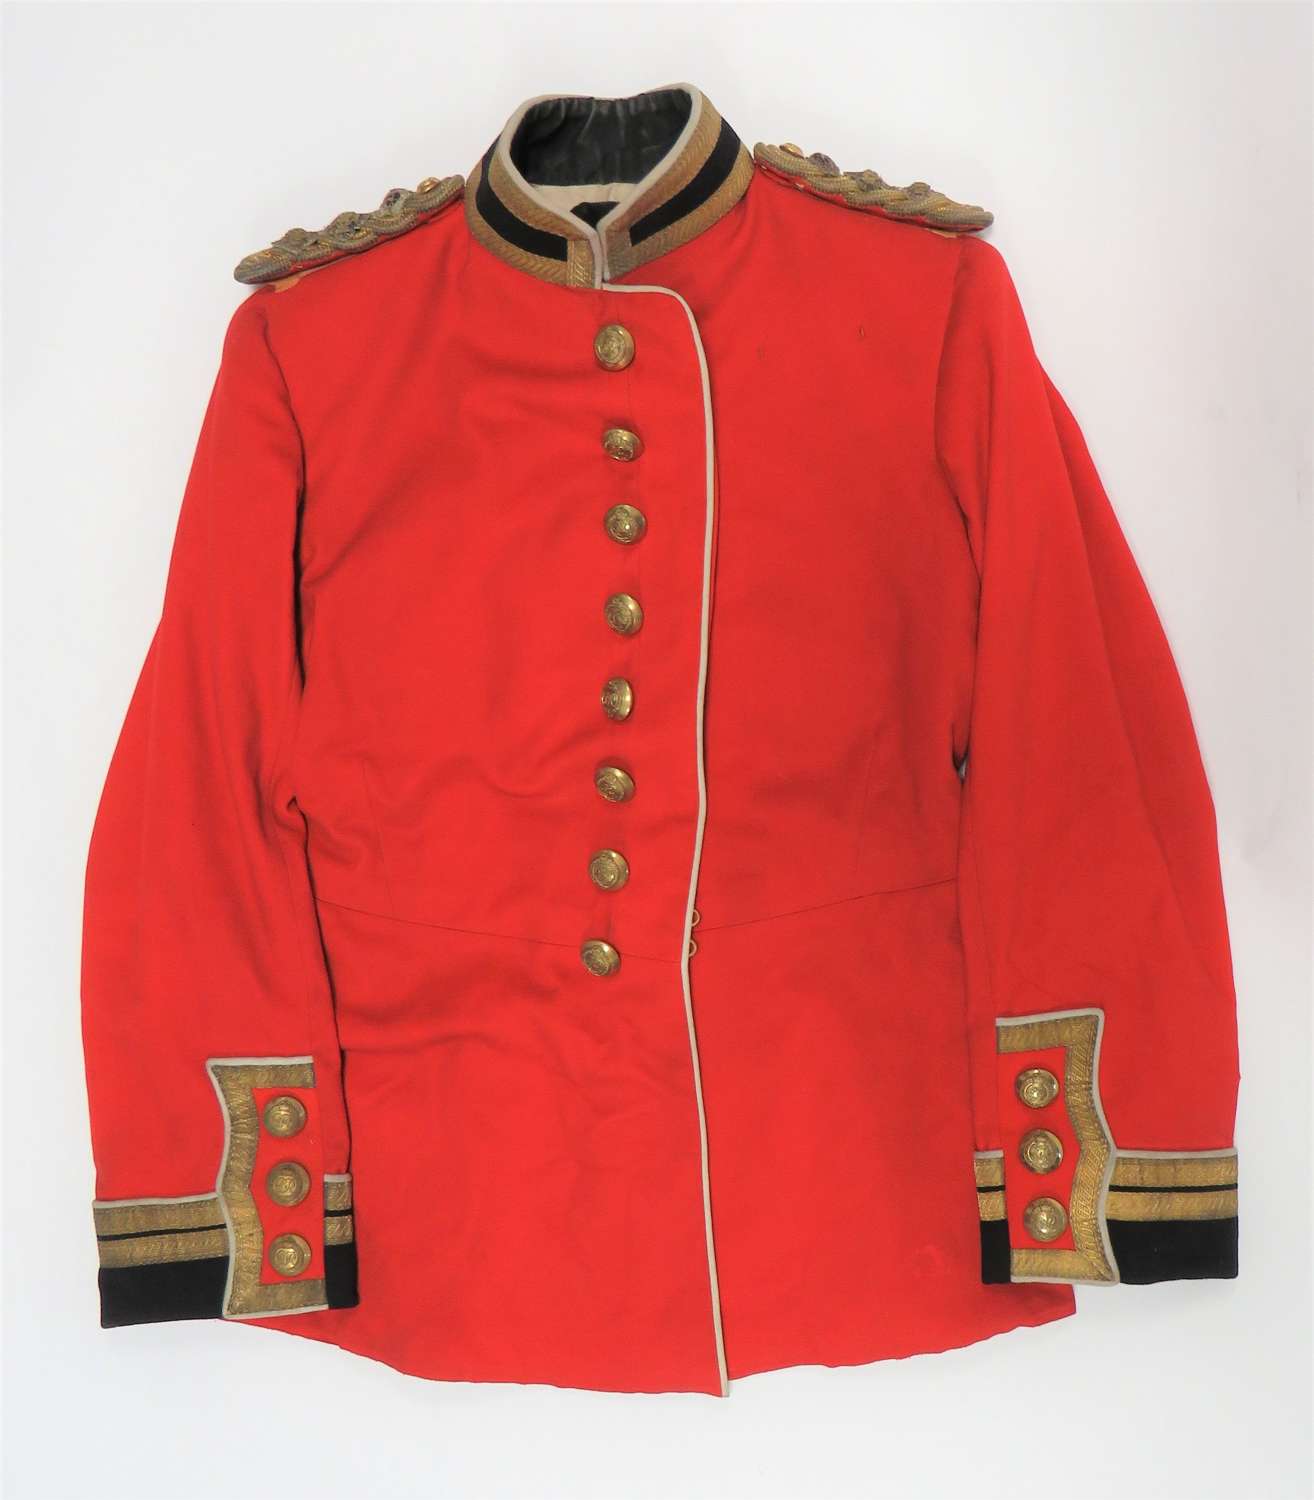 Post 1936 Staff Colonels Officers Scarlet Dress Tunic